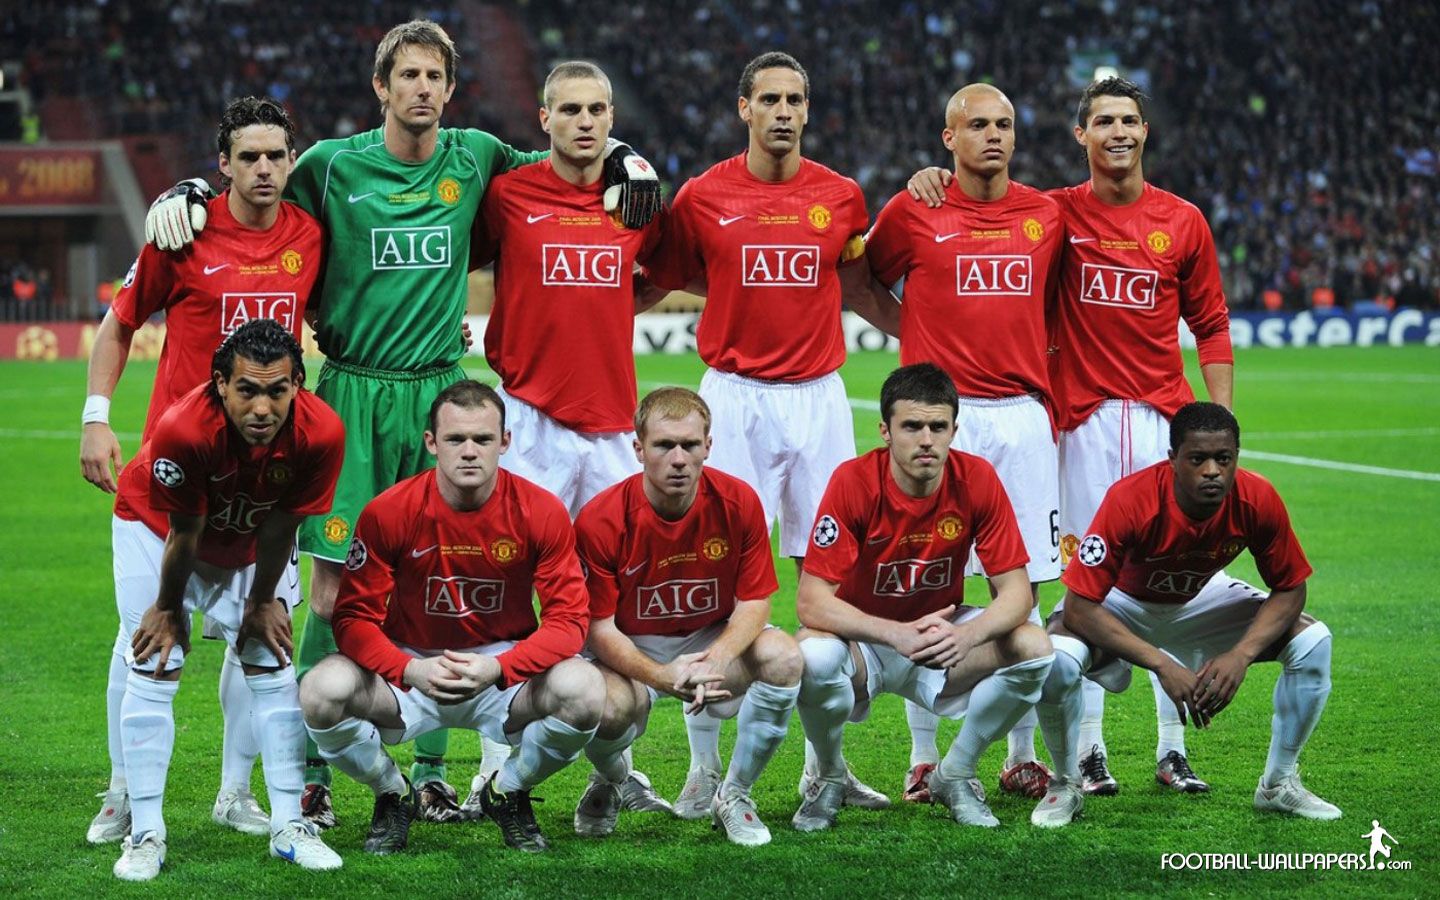 Manchester United. Manchester united champions, Manchester united champions league, Manchester united team